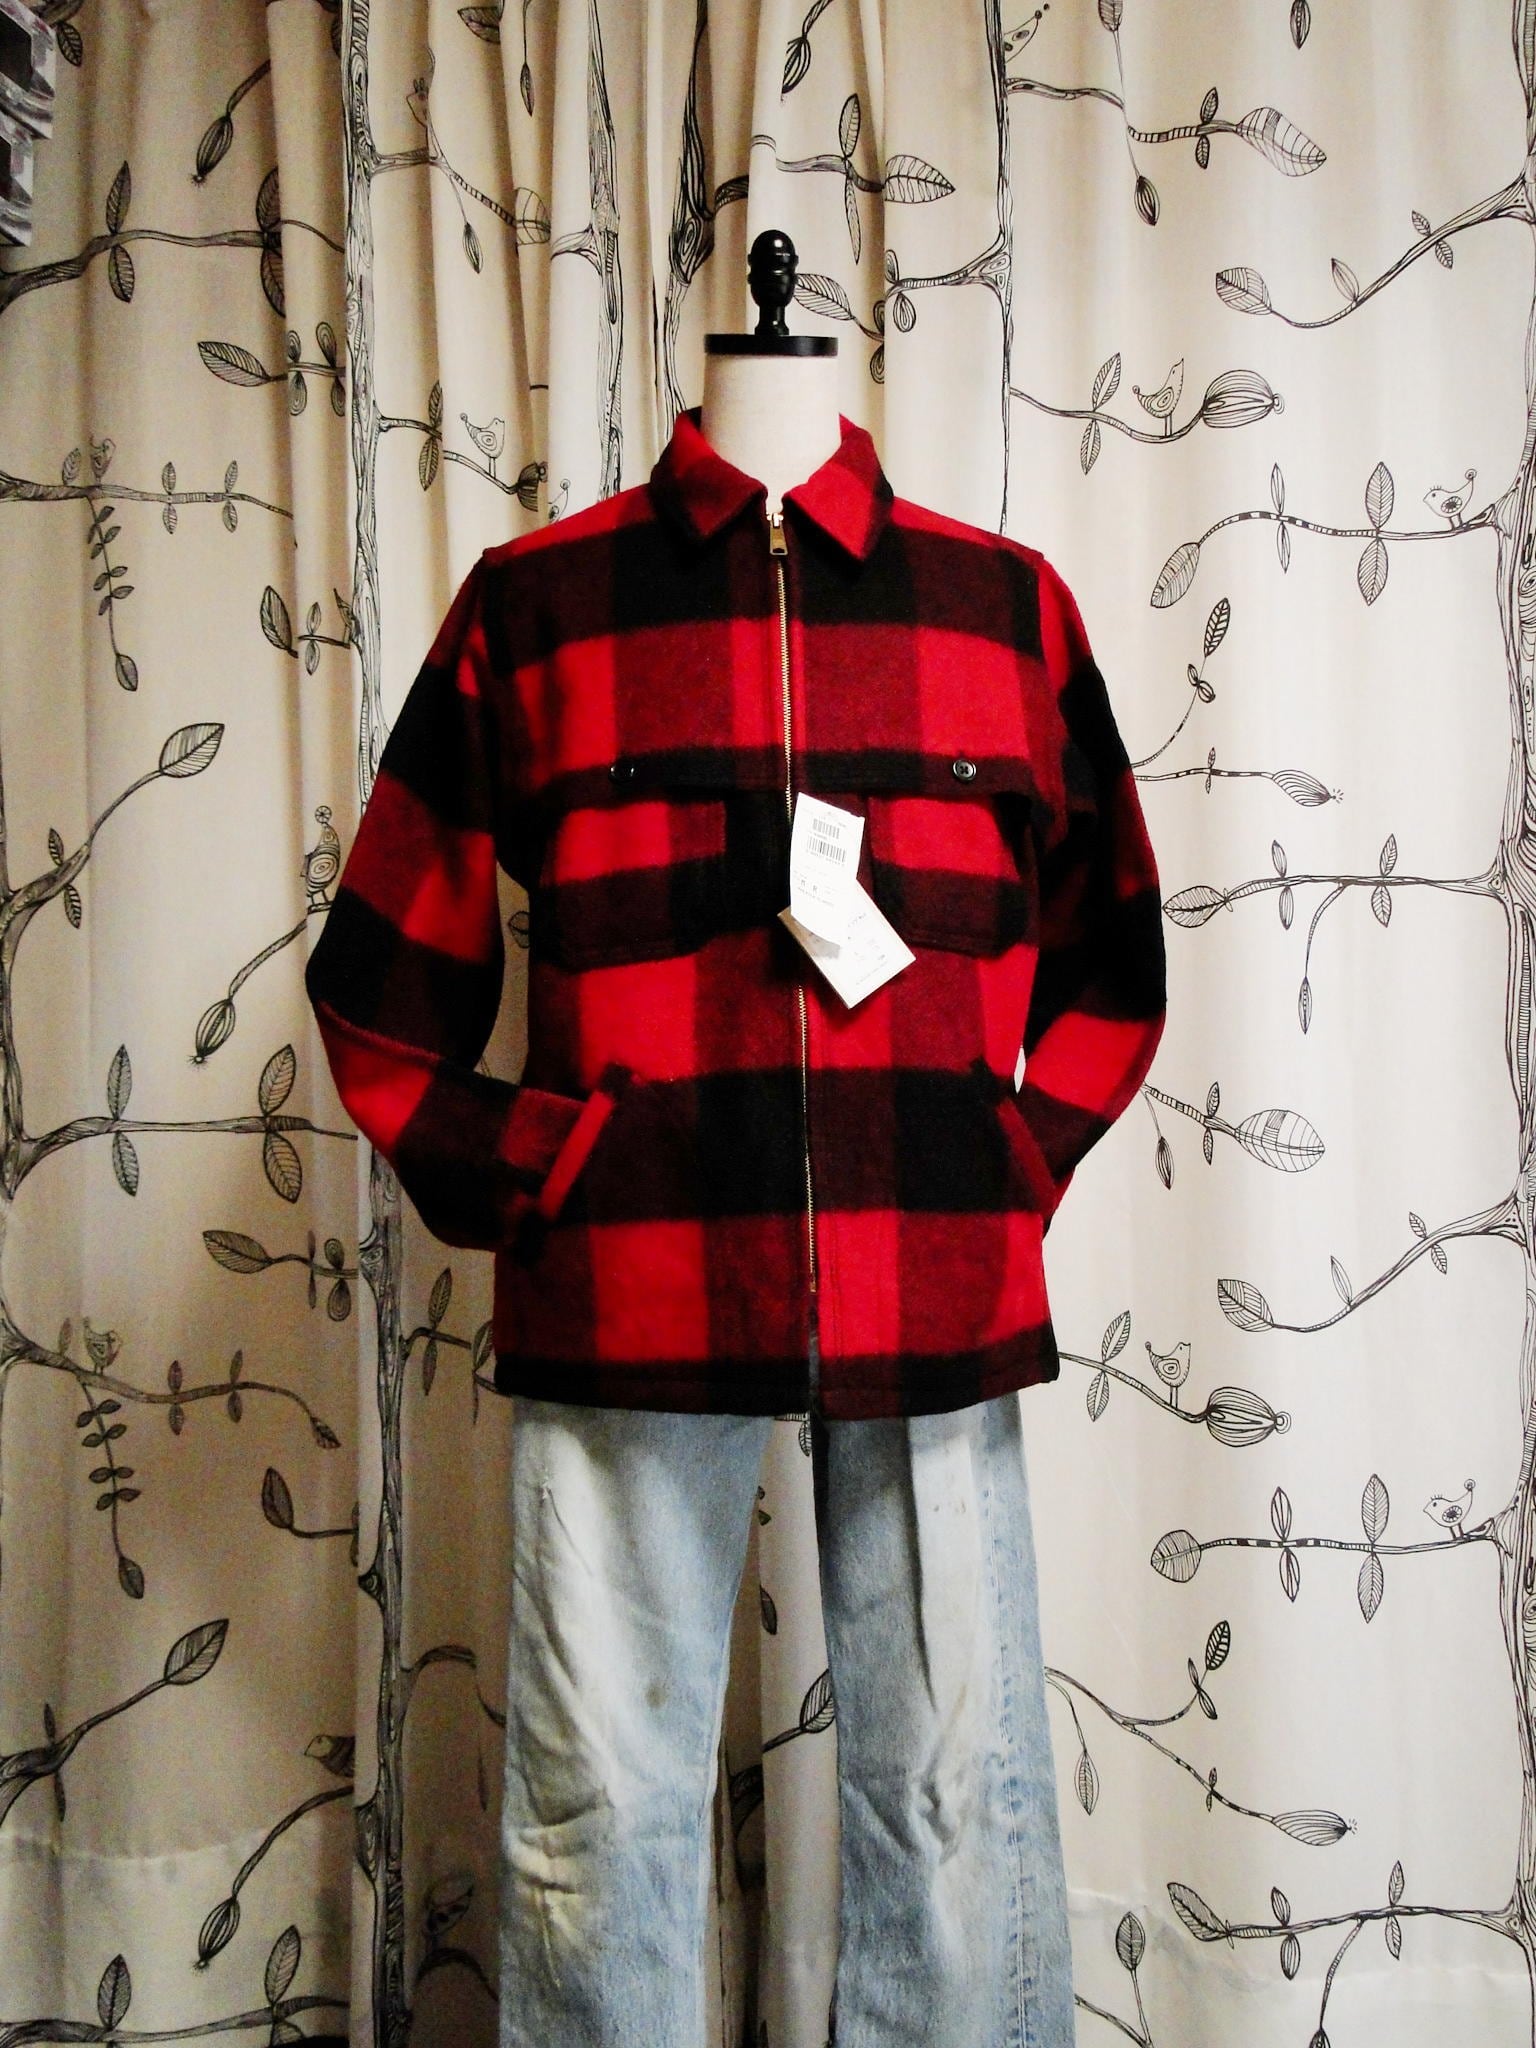 90's WoolRich ウールリッチ スタッグジャケット Made in U.S.A. バッファローチェック Deadstock |  pickersjpn powered by BASE